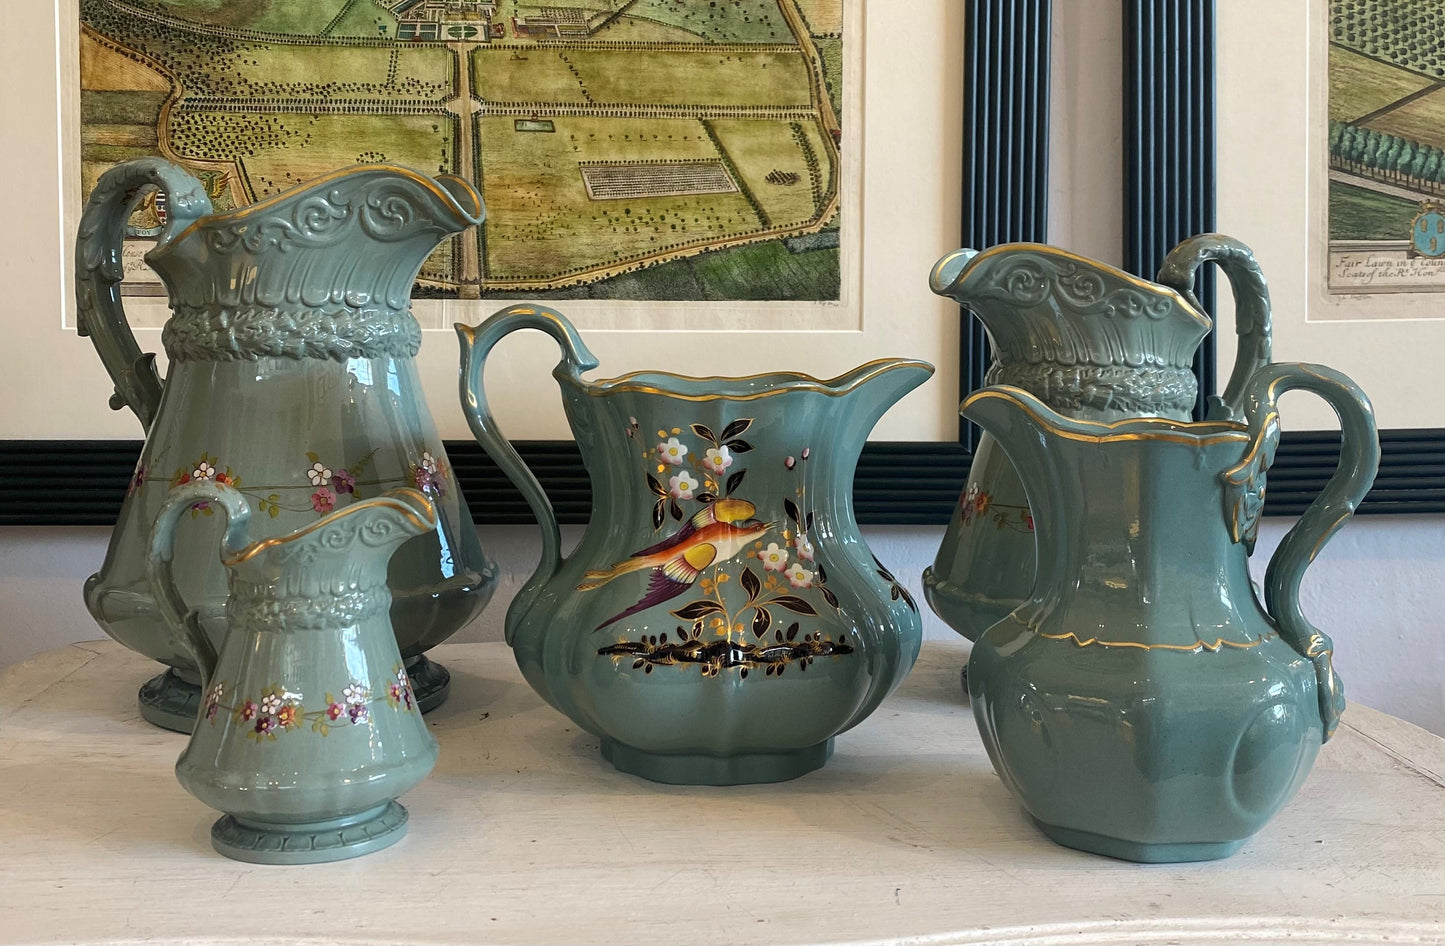 A Collection of Five Sage Stoneware Pitcher Jugs Handpainted with Flowers or Birds and Gilded Accents by William Ridgway & Co circa 1830s